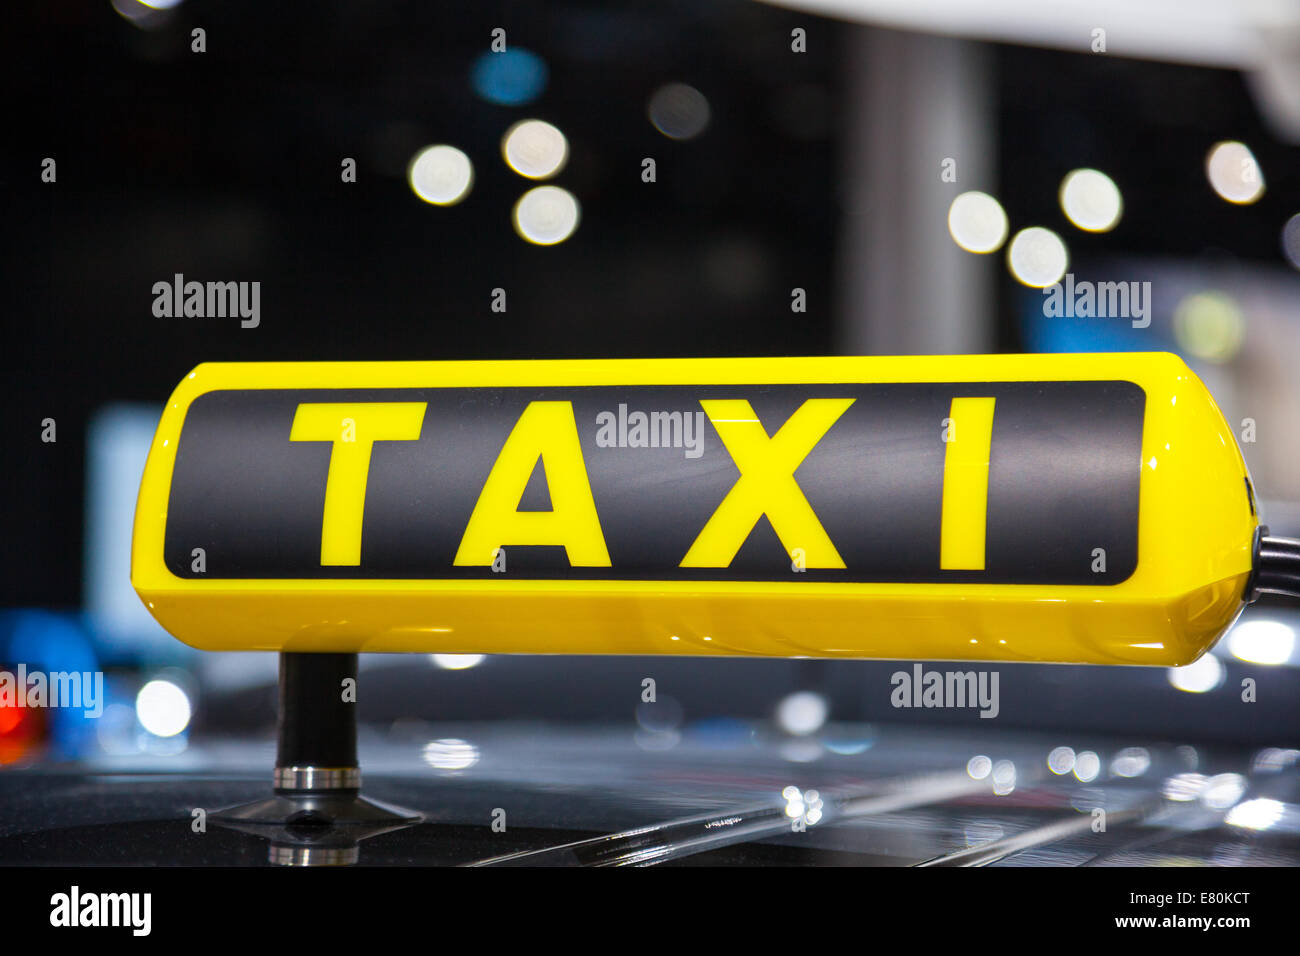 Taxi sign Stock Photo